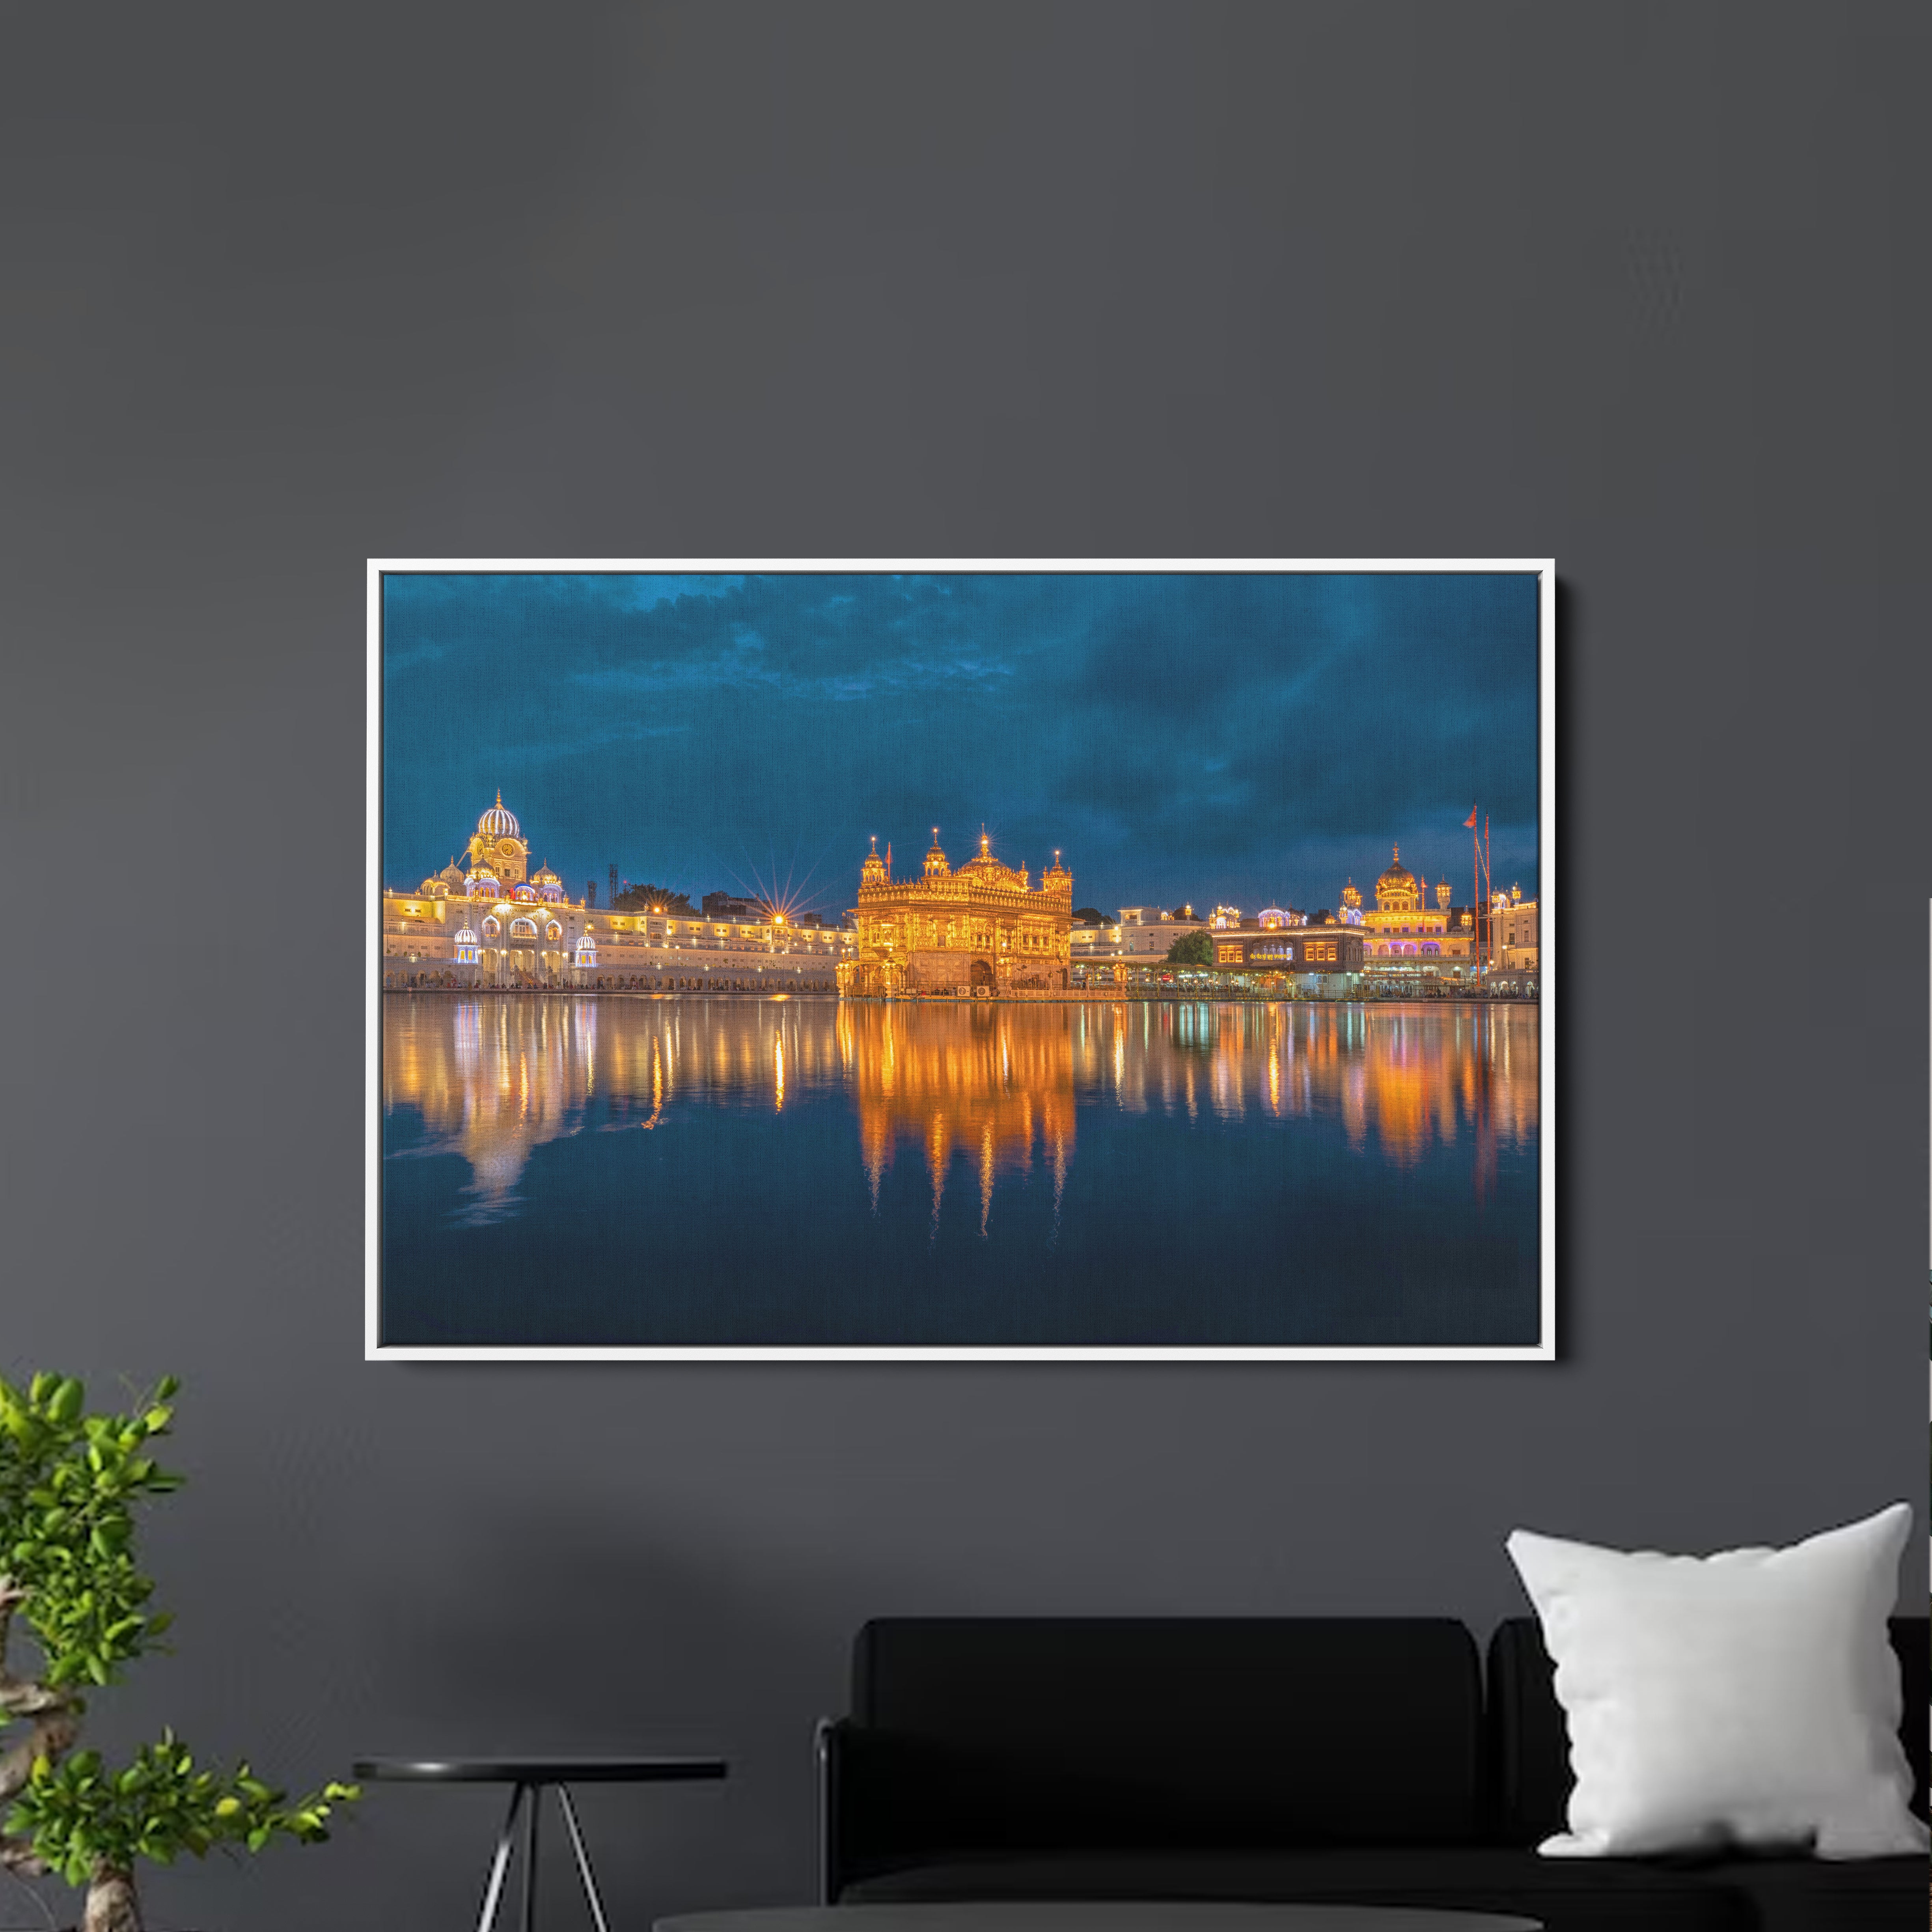 Golden Temple Amritsar In Night Canvas Wall Painting